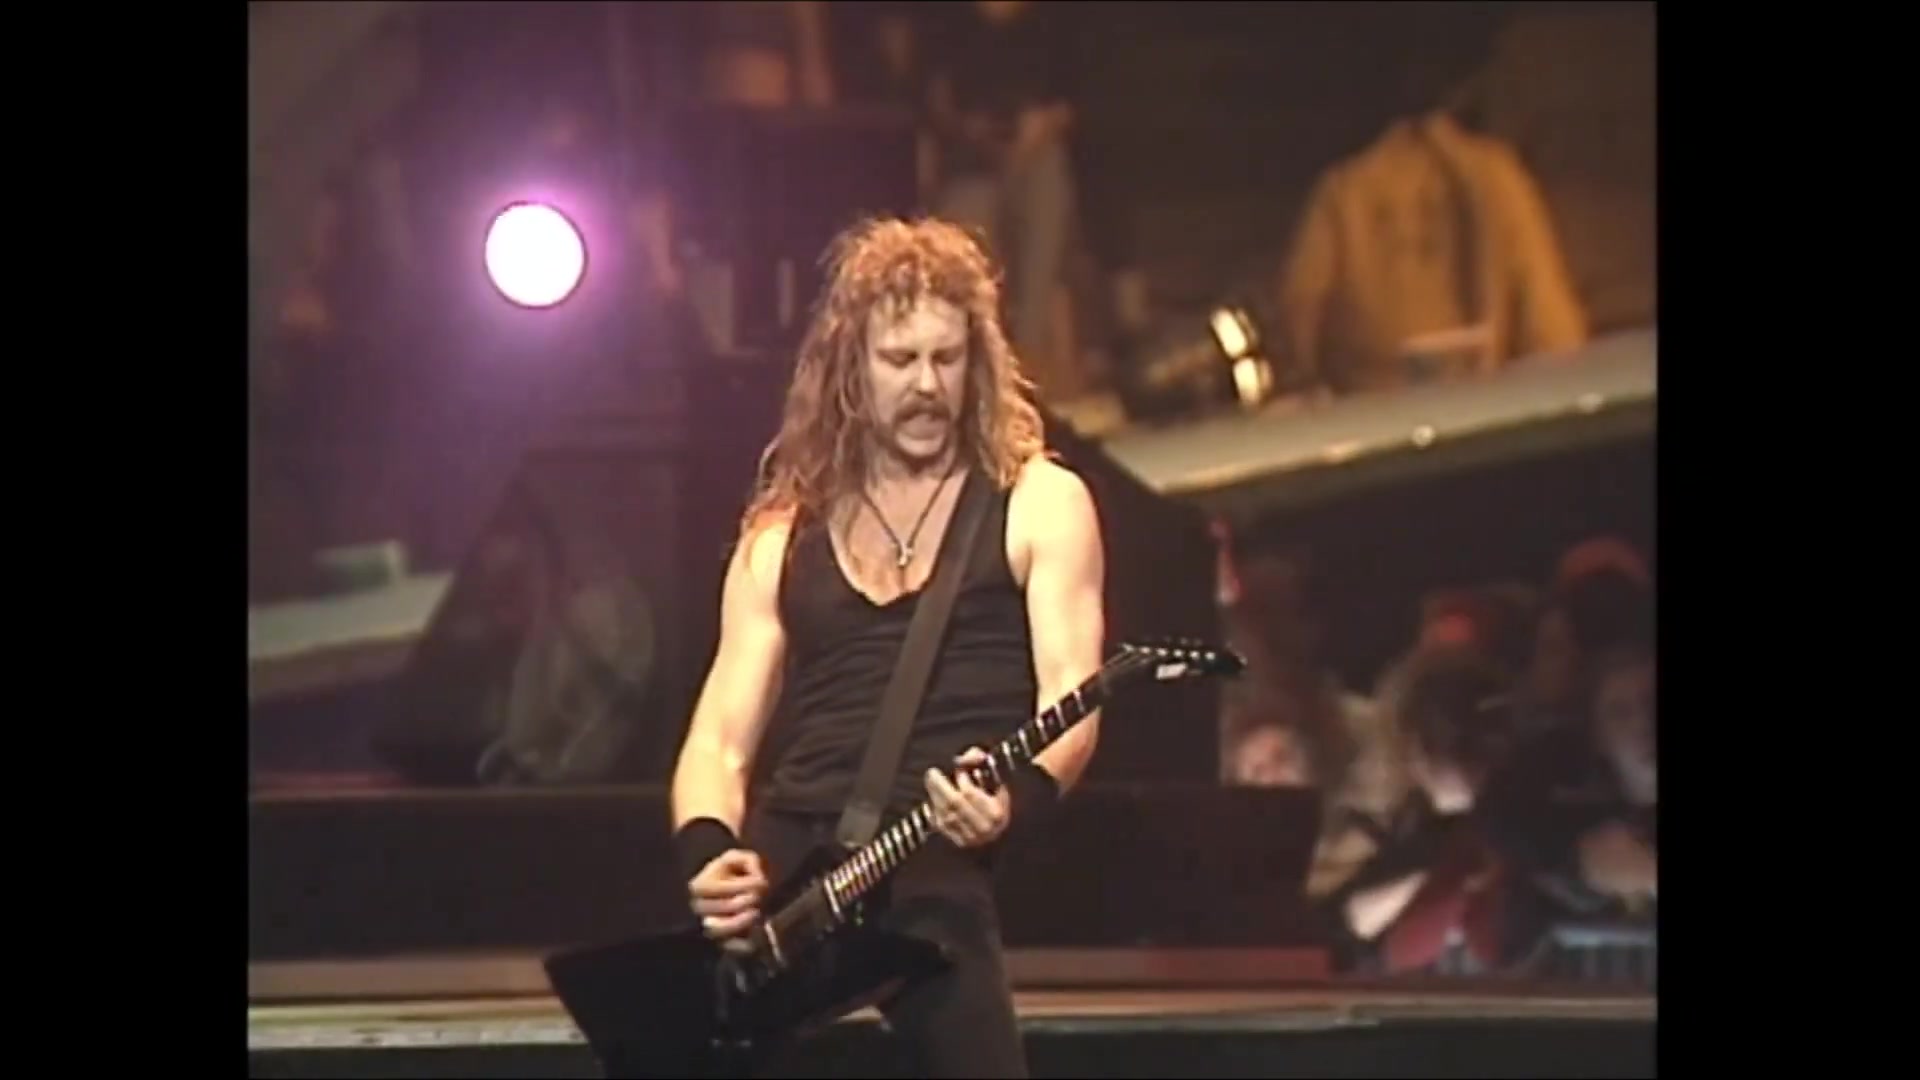 Metallica- Master Of Puppets (Live in Los Angeles, CA - February 13, 1992) [Full